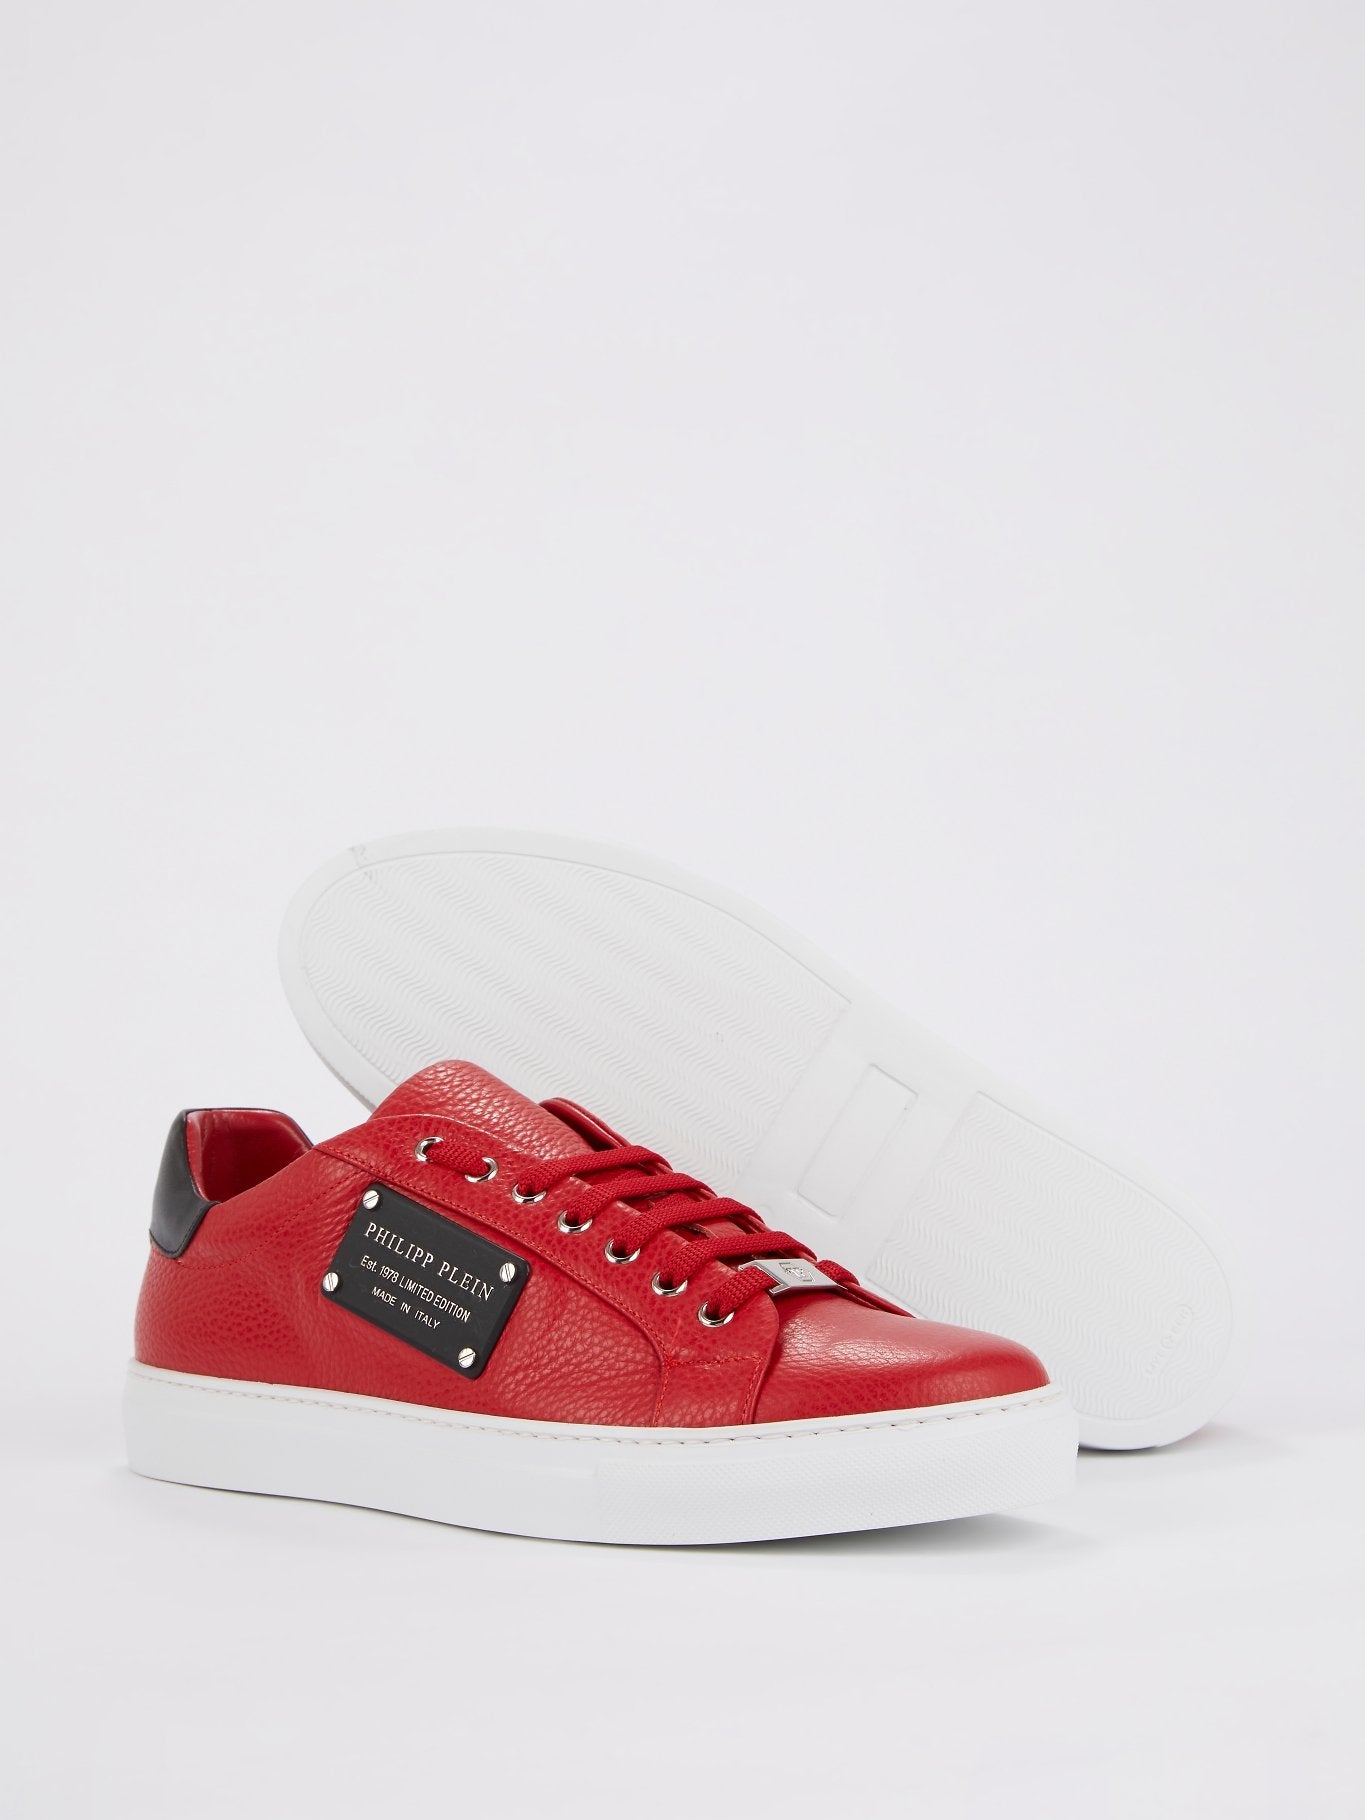 Red Low Top Leather Sneakers